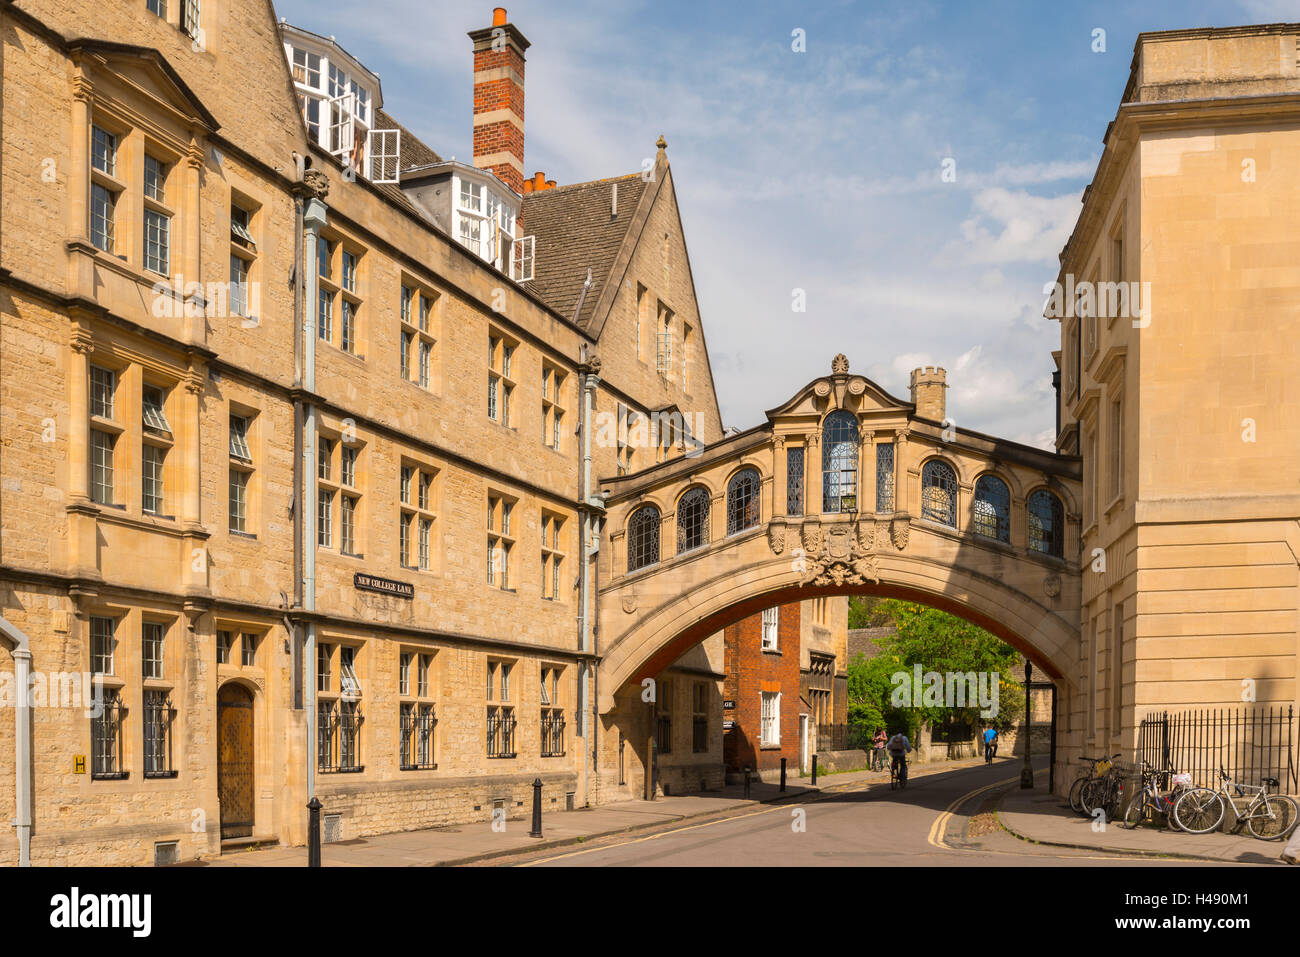 Hertford Bridge, also known as the Bridge of Sighs forming part of Hertford College in Oxford, Oxfordshire, England. Stock Photo